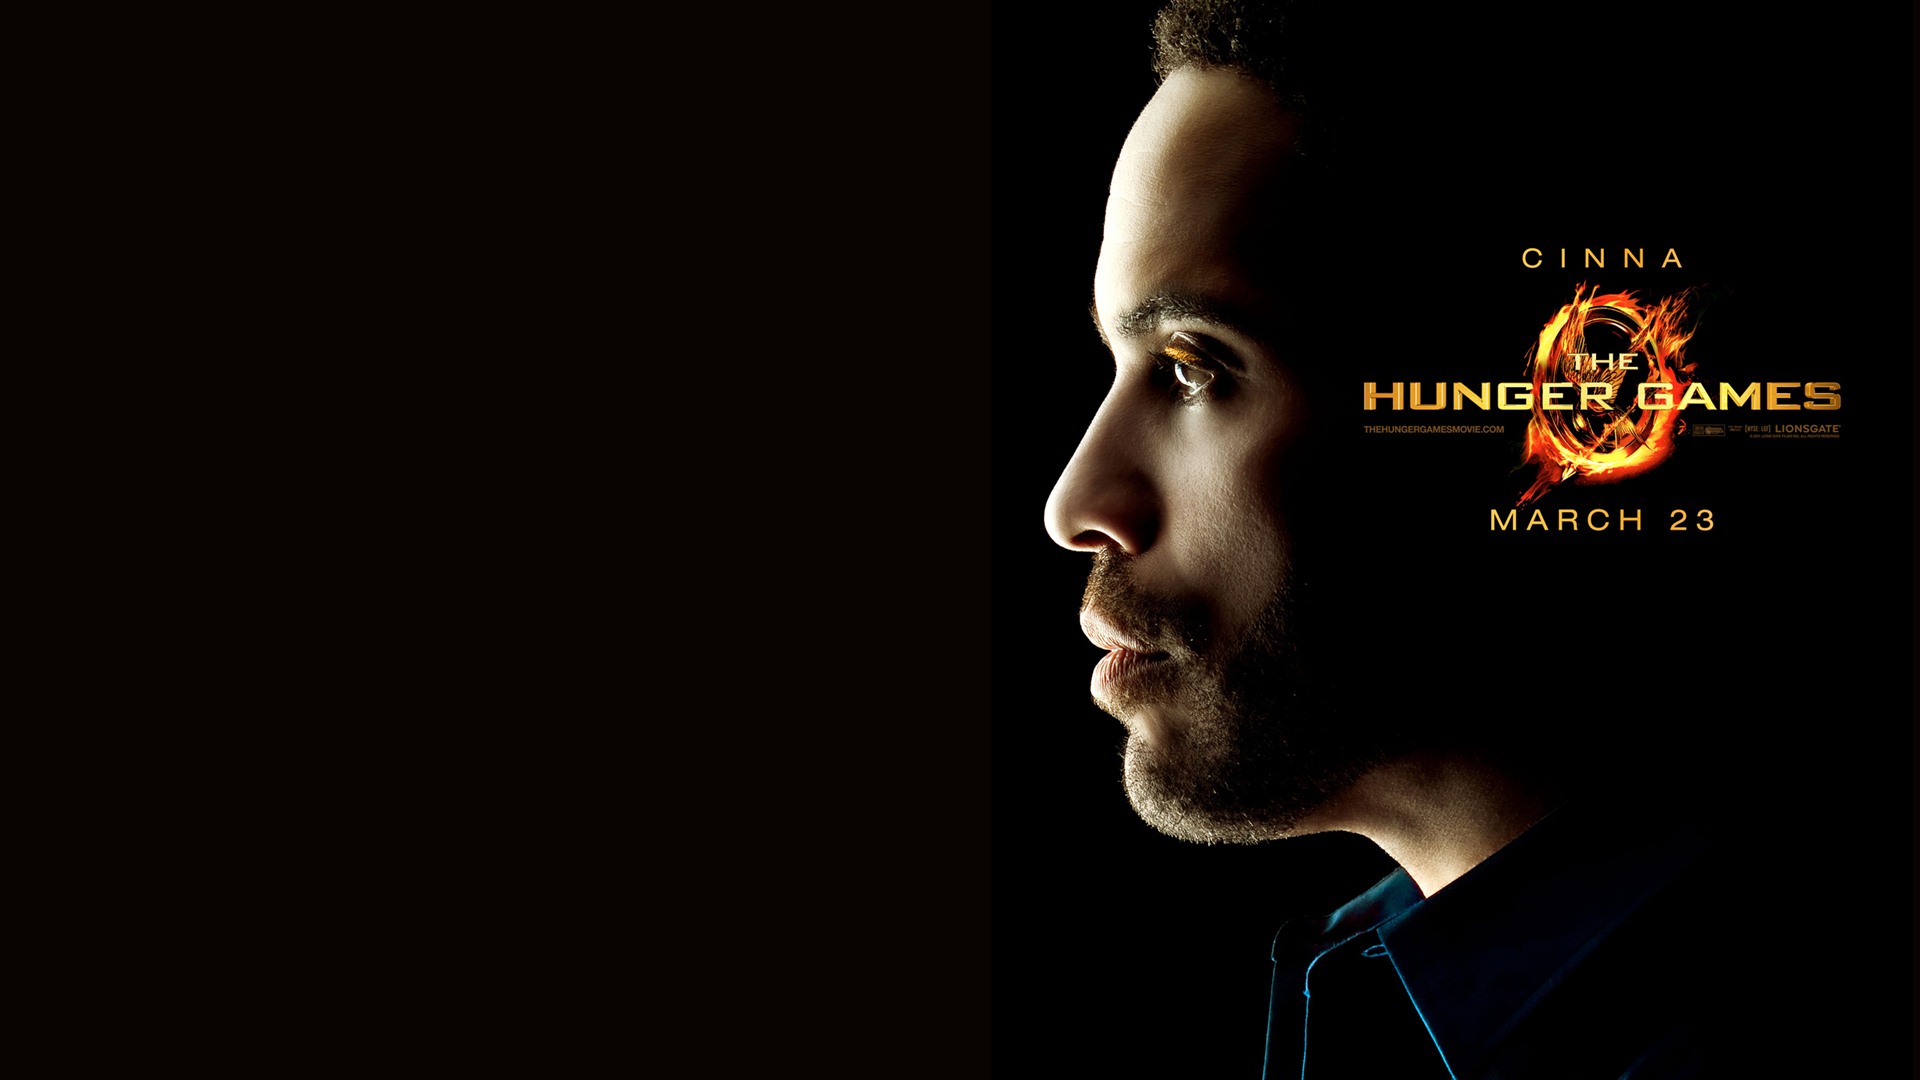 The Hunger Games HD wallpapers #11 - 1920x1080